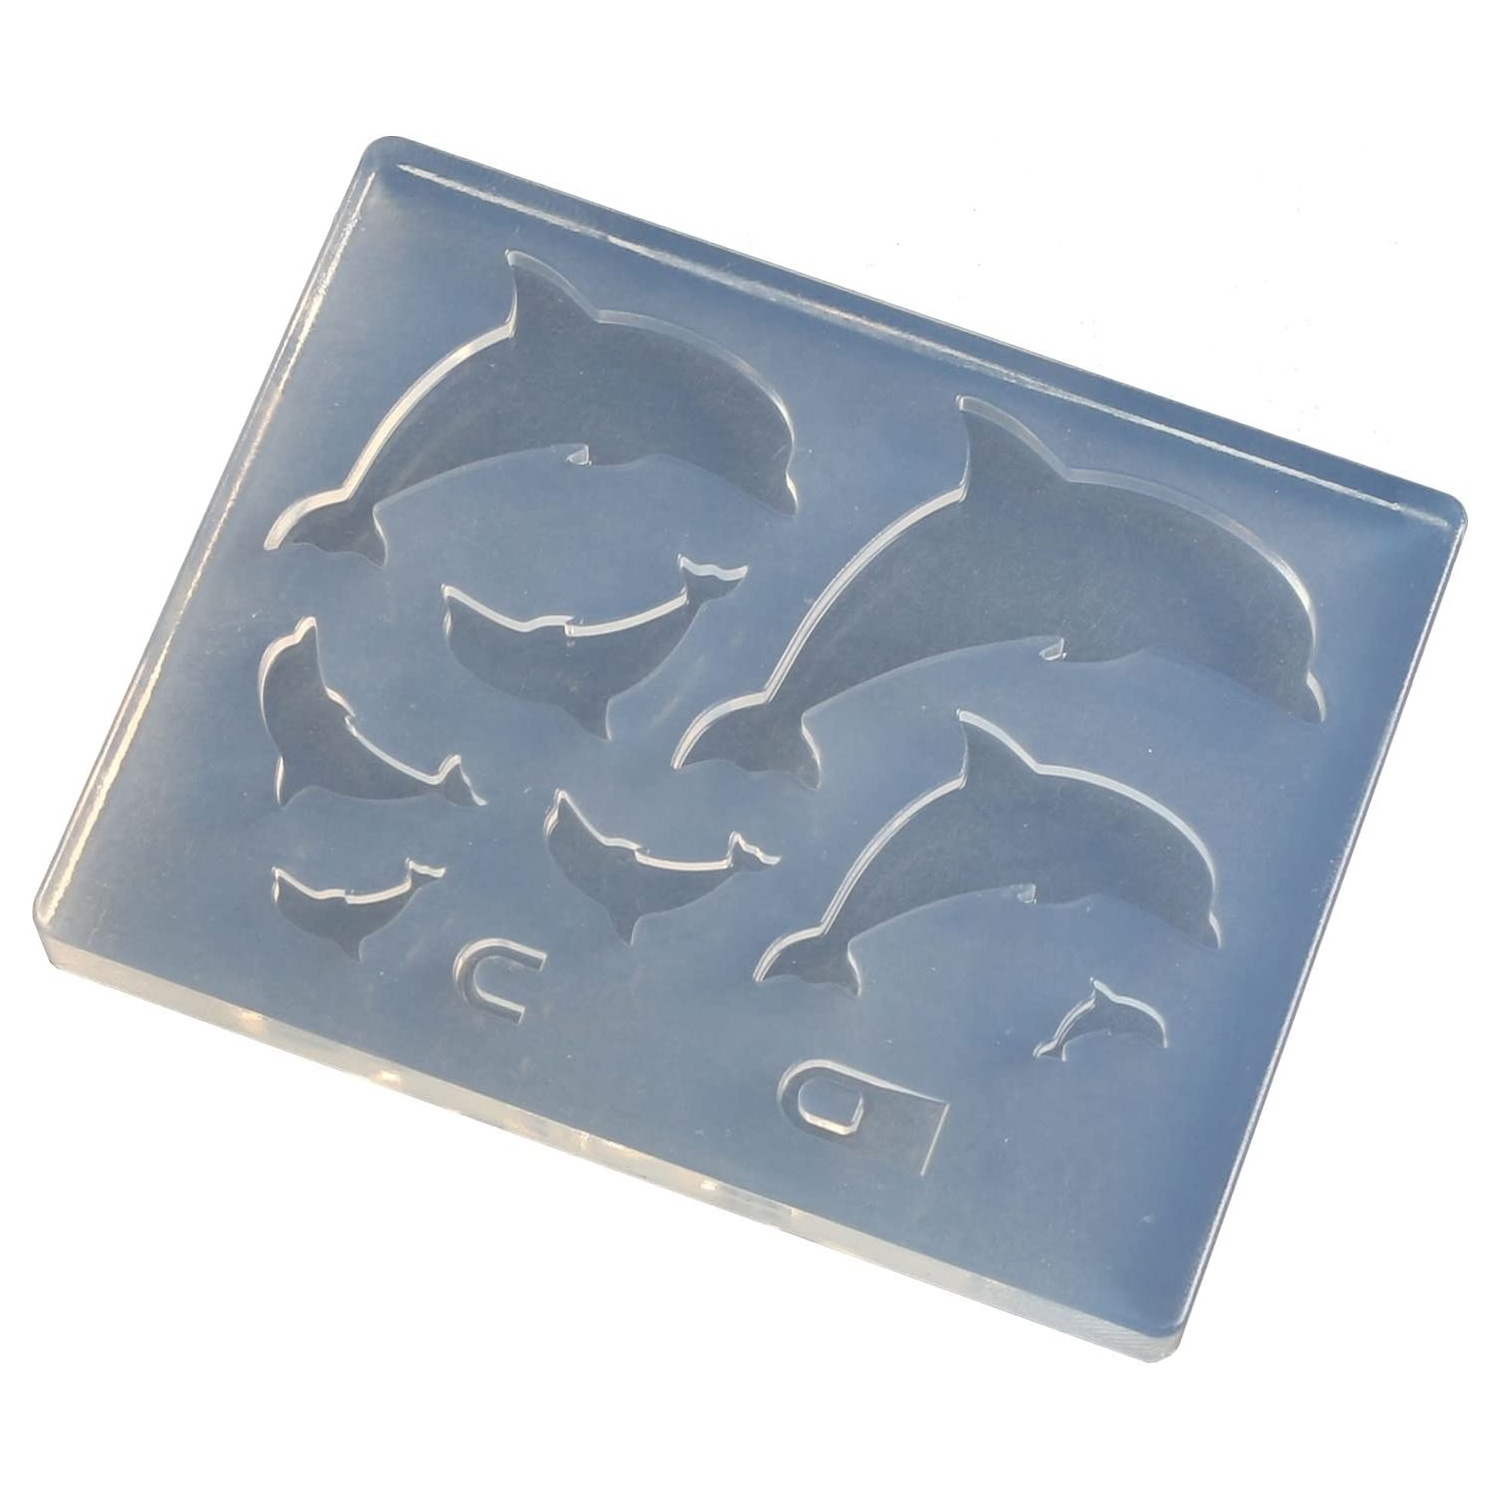 KAM-REJ-600  Resin Crafting Silicone Mold  (pcs)